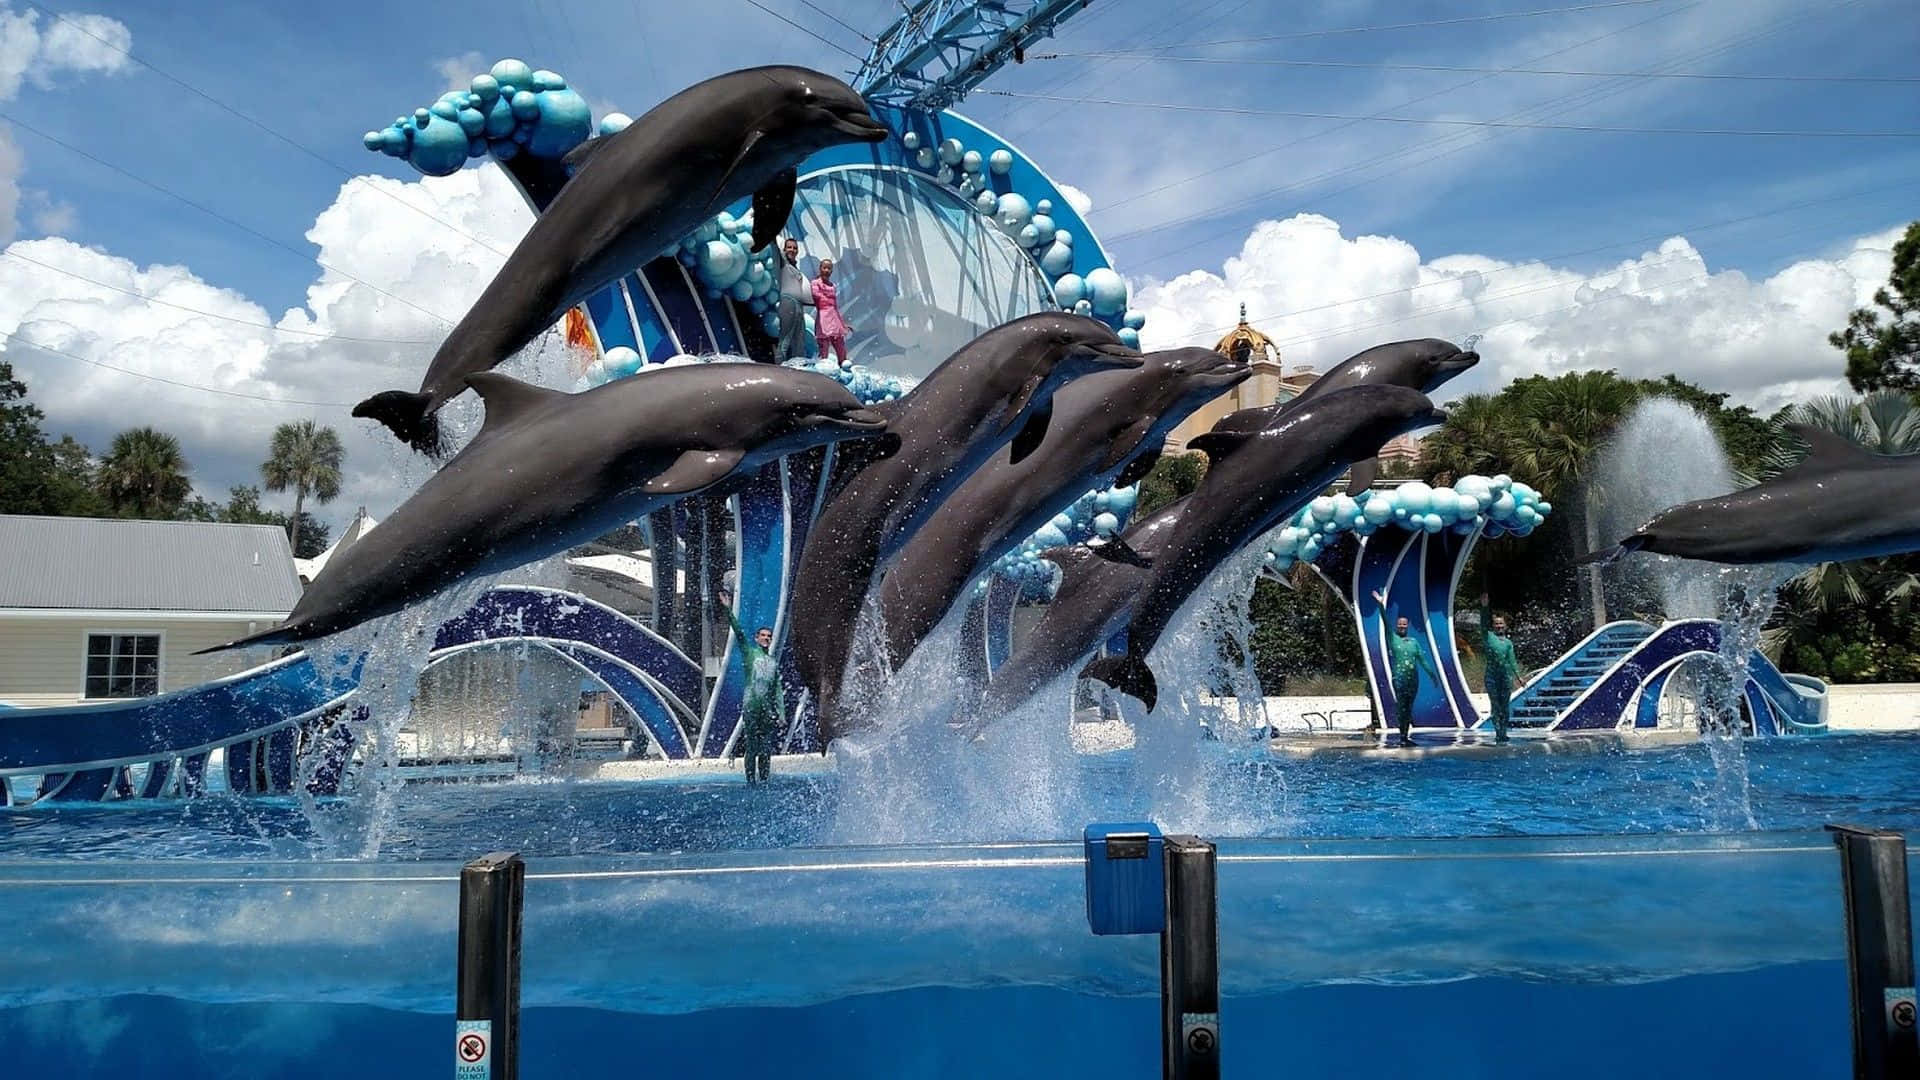 Take a dive with the dolphins at SeaWorld